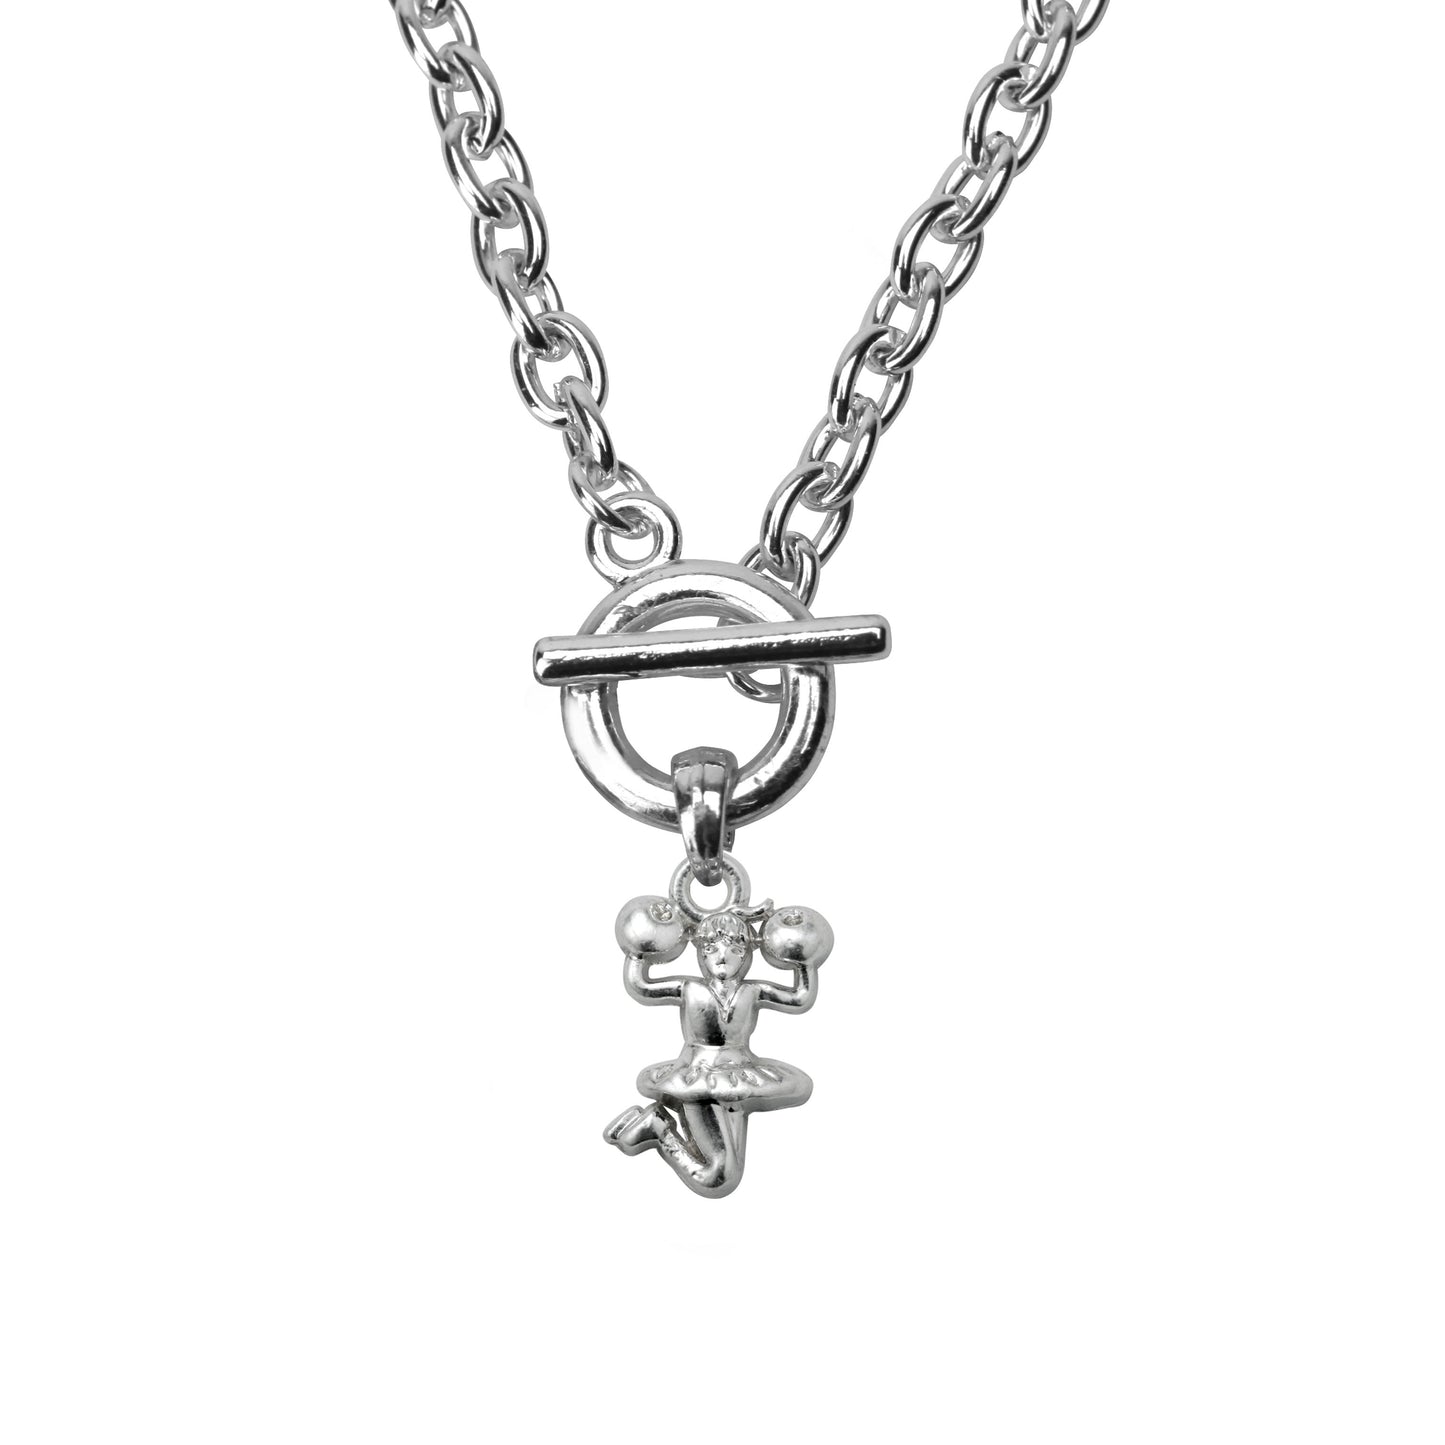 Silver Petite Cheerleader Charm Toggle Necklace